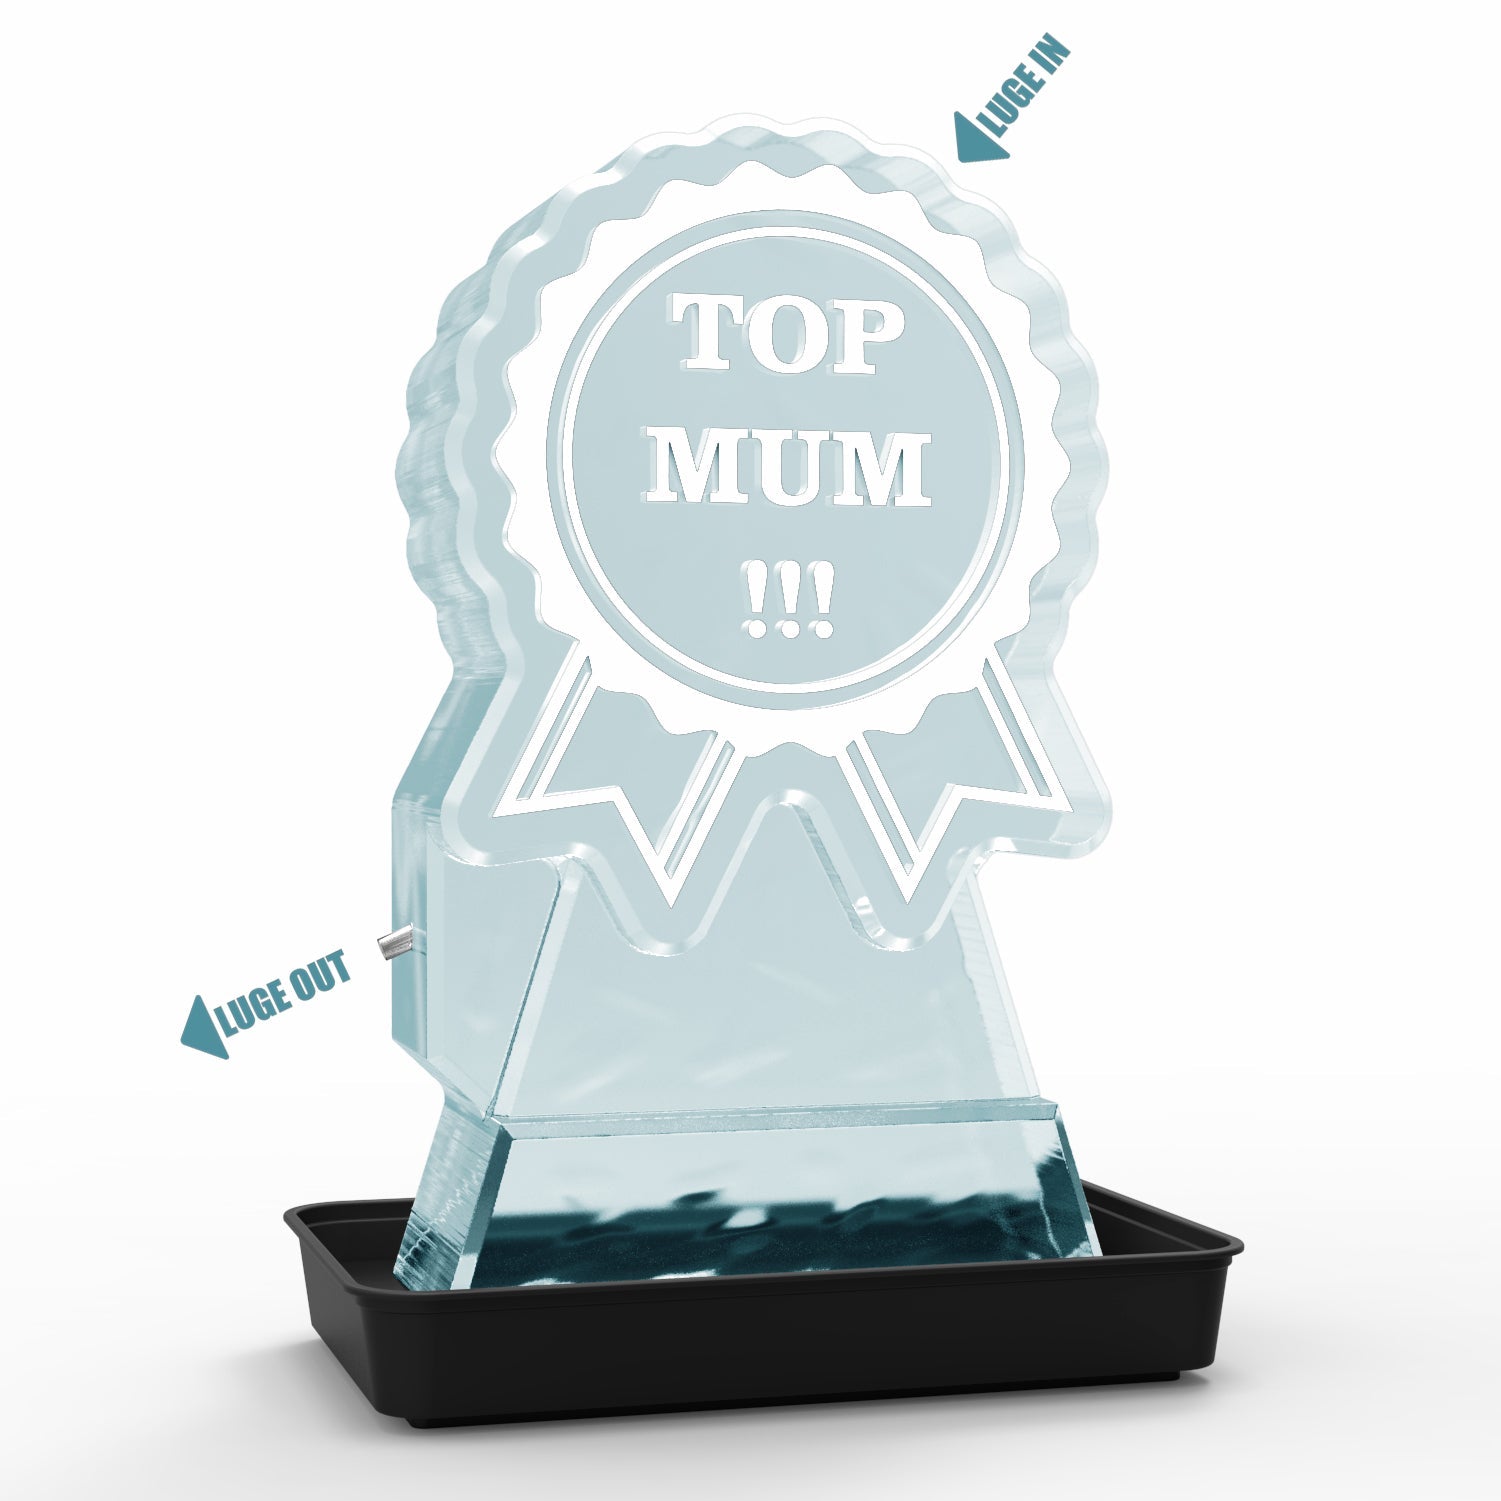 Top Mum Award (Mother's Day) - VodkaLuge